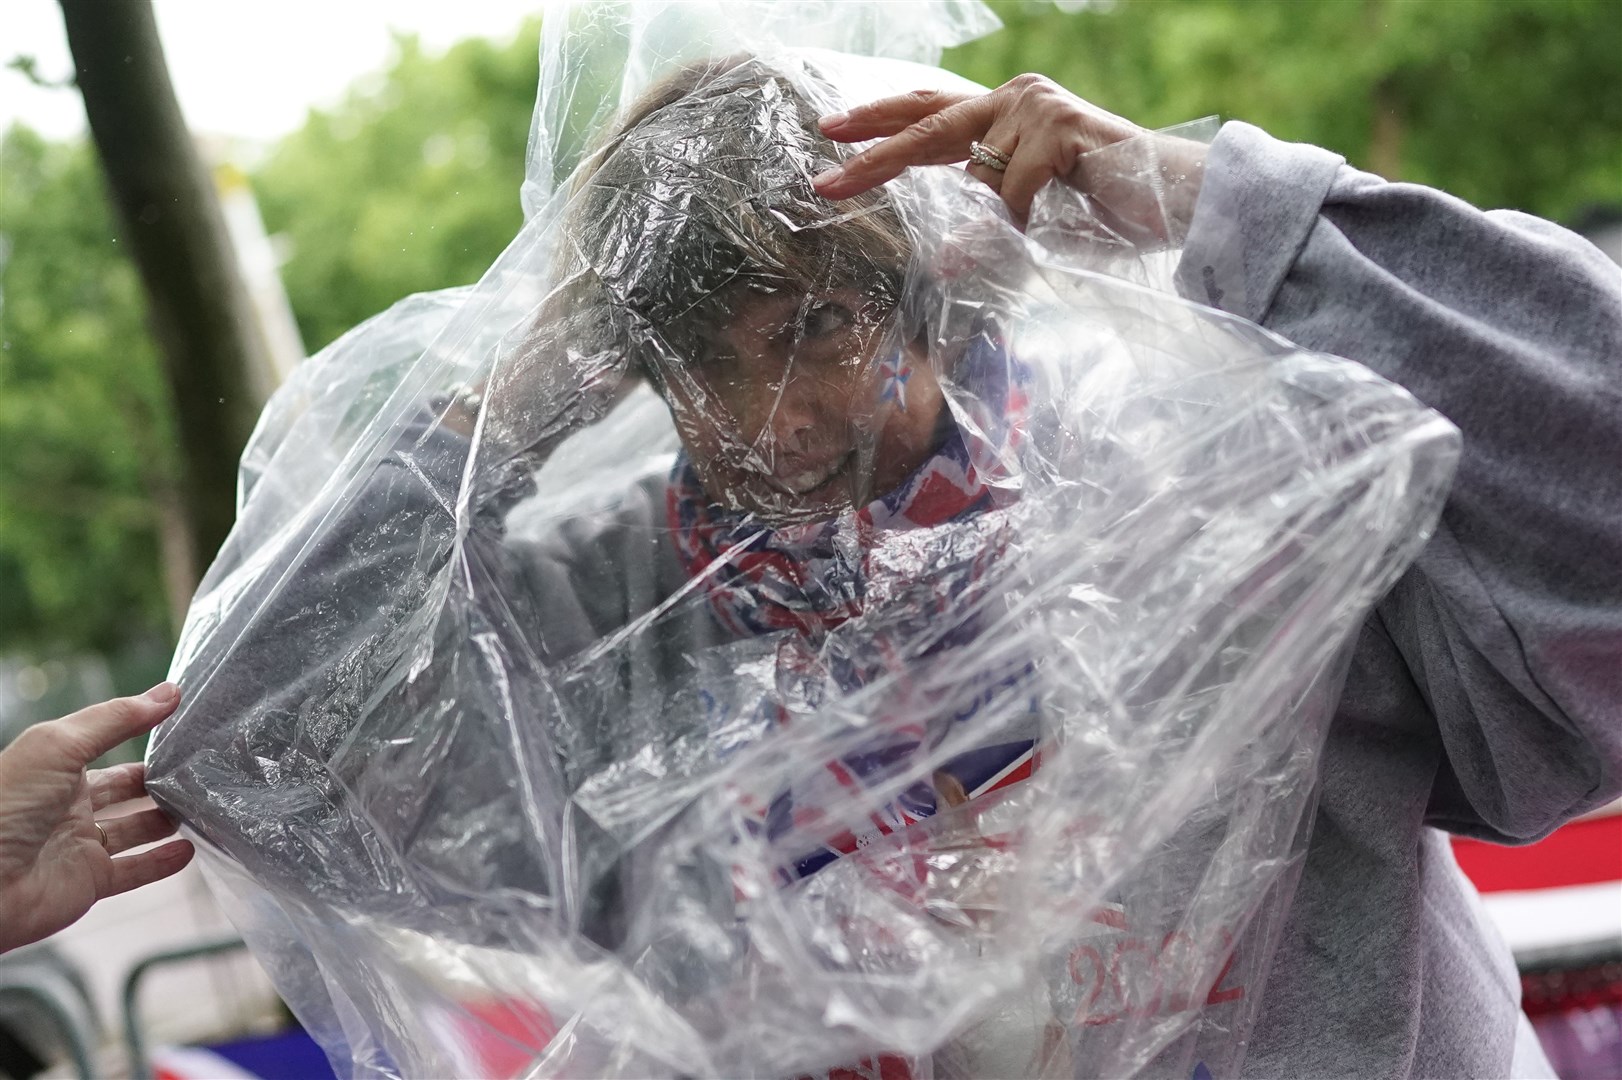 Royal superfan Donna Werner, from the US, puts on a rain cover on The Mall, near Buckingham Palace, on Tuesday (Aaron Chown/PA)